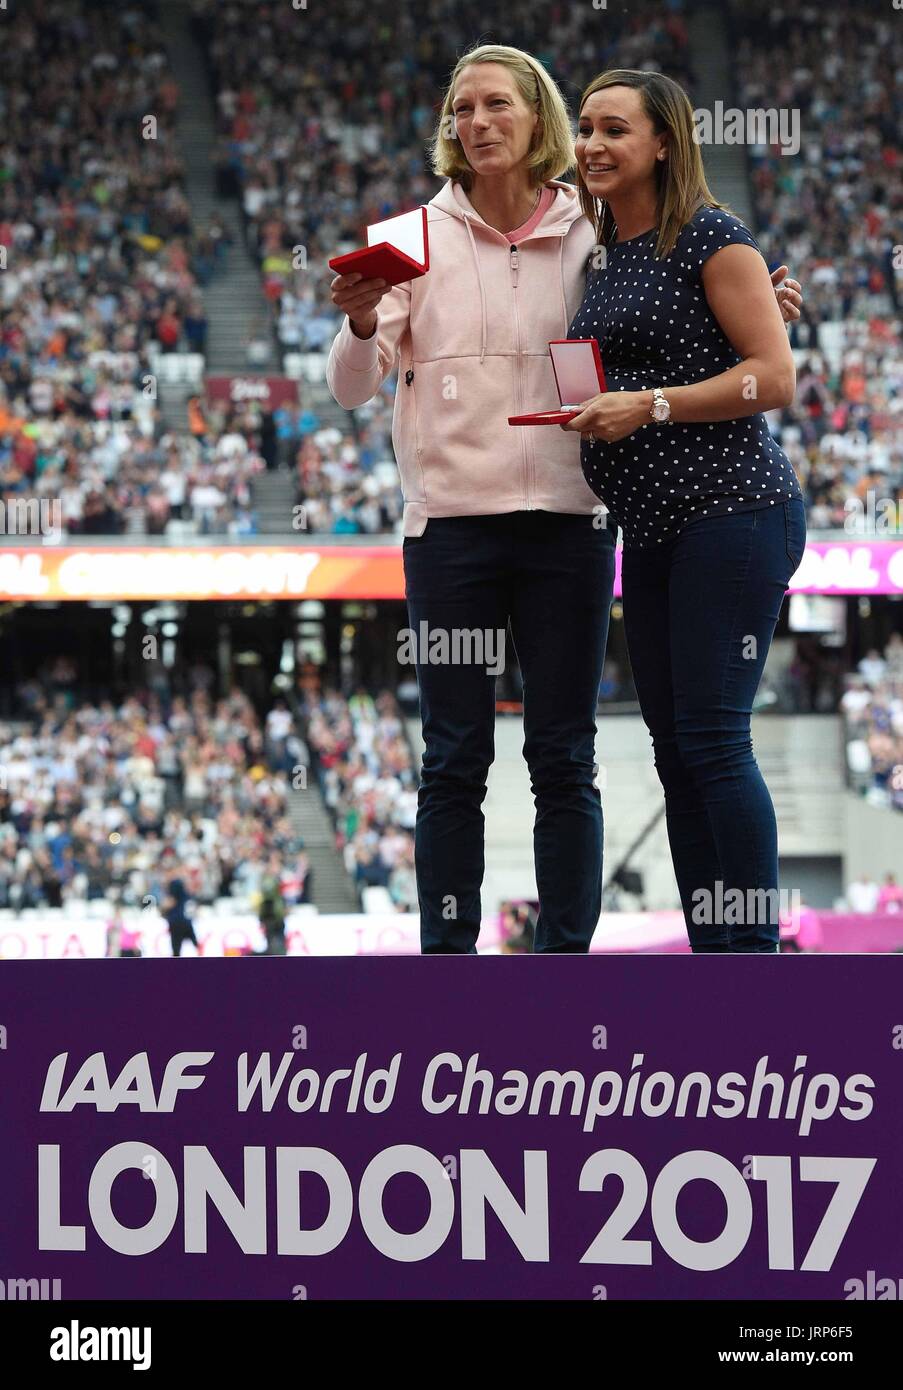 London, UK. 6th Aug, 2017. Former heptathlete Jennifer Oeser (L) of Germany belatedly receives her silver medal in the heptathlon of 2011 at the IAAF World Championships at the Olympic Stadium in Athletics in London, UK, 6 August 2017. Britain's Jessica Ennis (r) was named world champion. Oeser moved from third to second place after then-champion Tatyana Chernova of Russia was disqualified for doping. Photo: Rainer Jensen/dpa/Alamy Live News Stock Photo